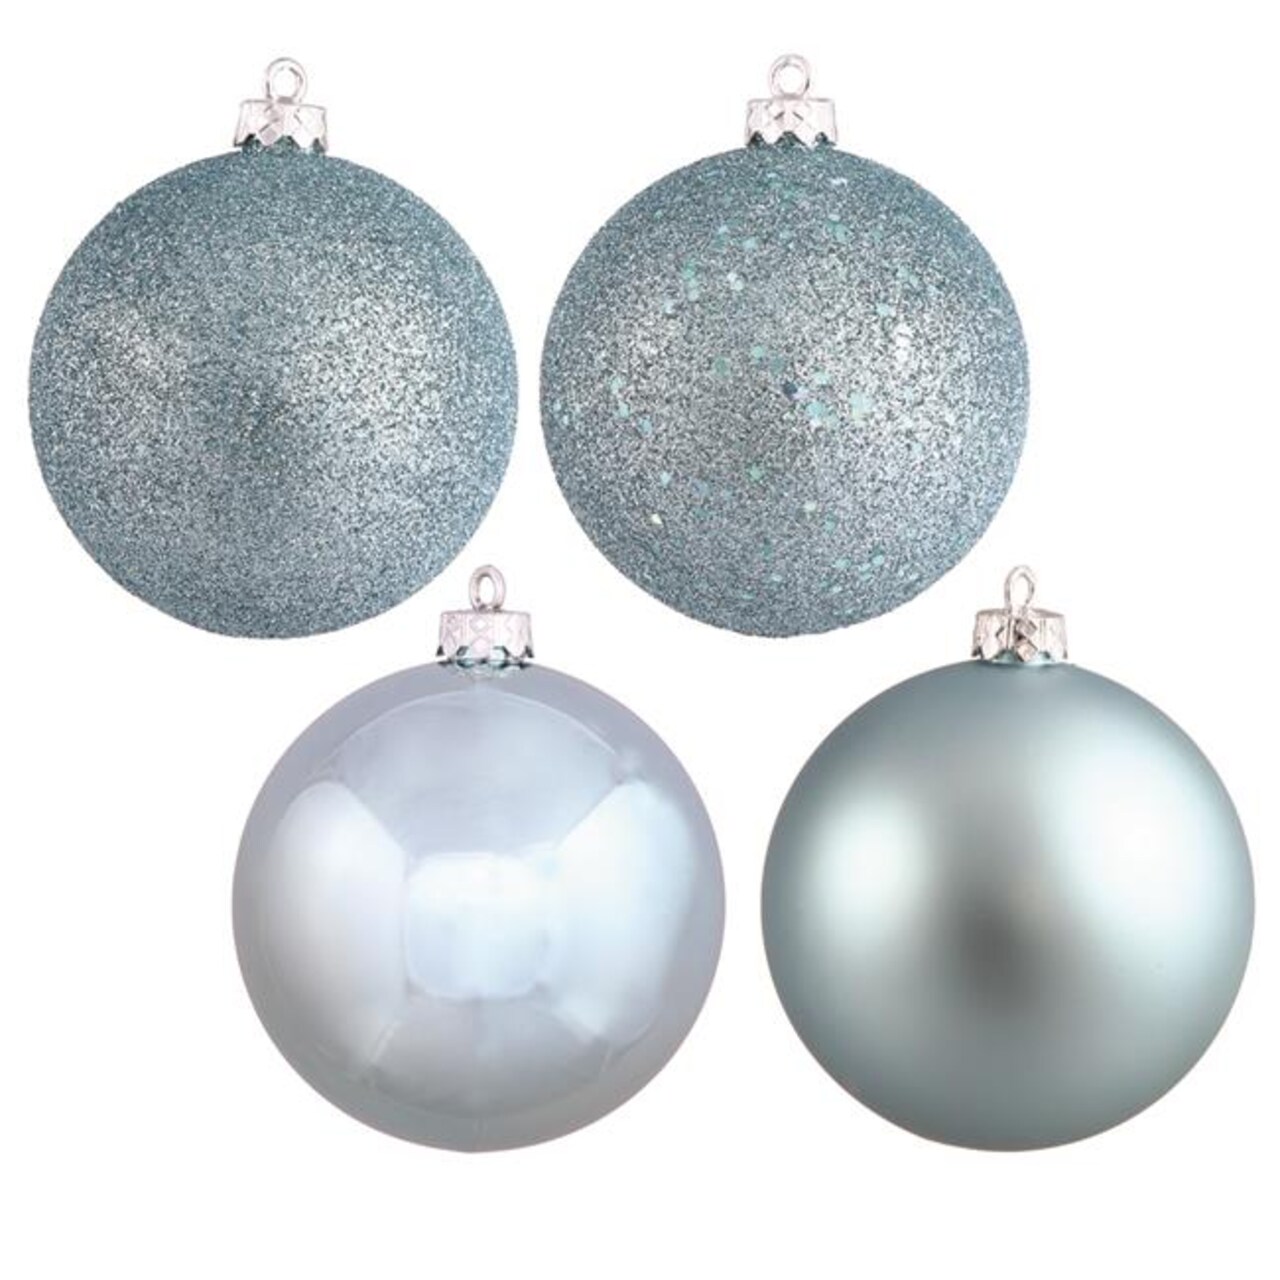 Baby Blue 4 Finish Assorted Ball Ornament, 2.4 in. - 60 per Box